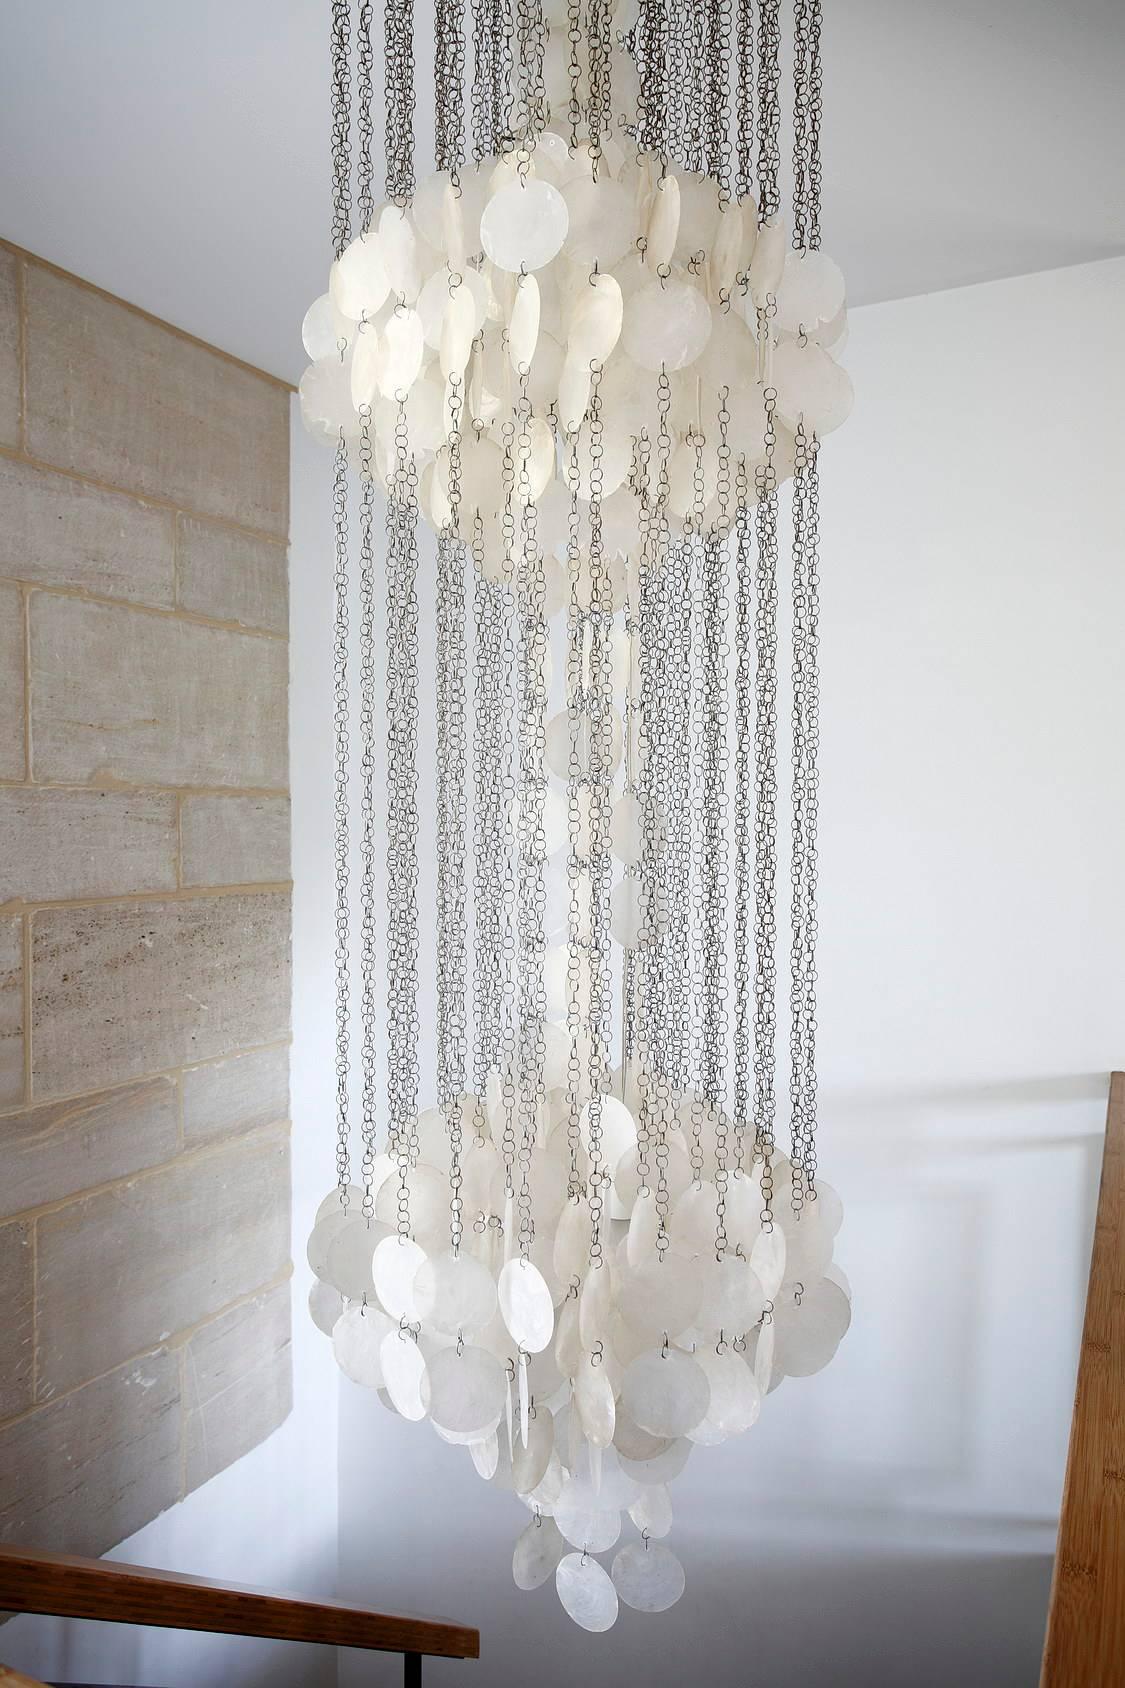 Suspended lamp composed of a white wooden round ceiling light and some metallic chains maintaining two spheres richly decorated with shells in mother of pearl. Two bulbs completely hidden by the curtains of shells create a fluid and soft light.